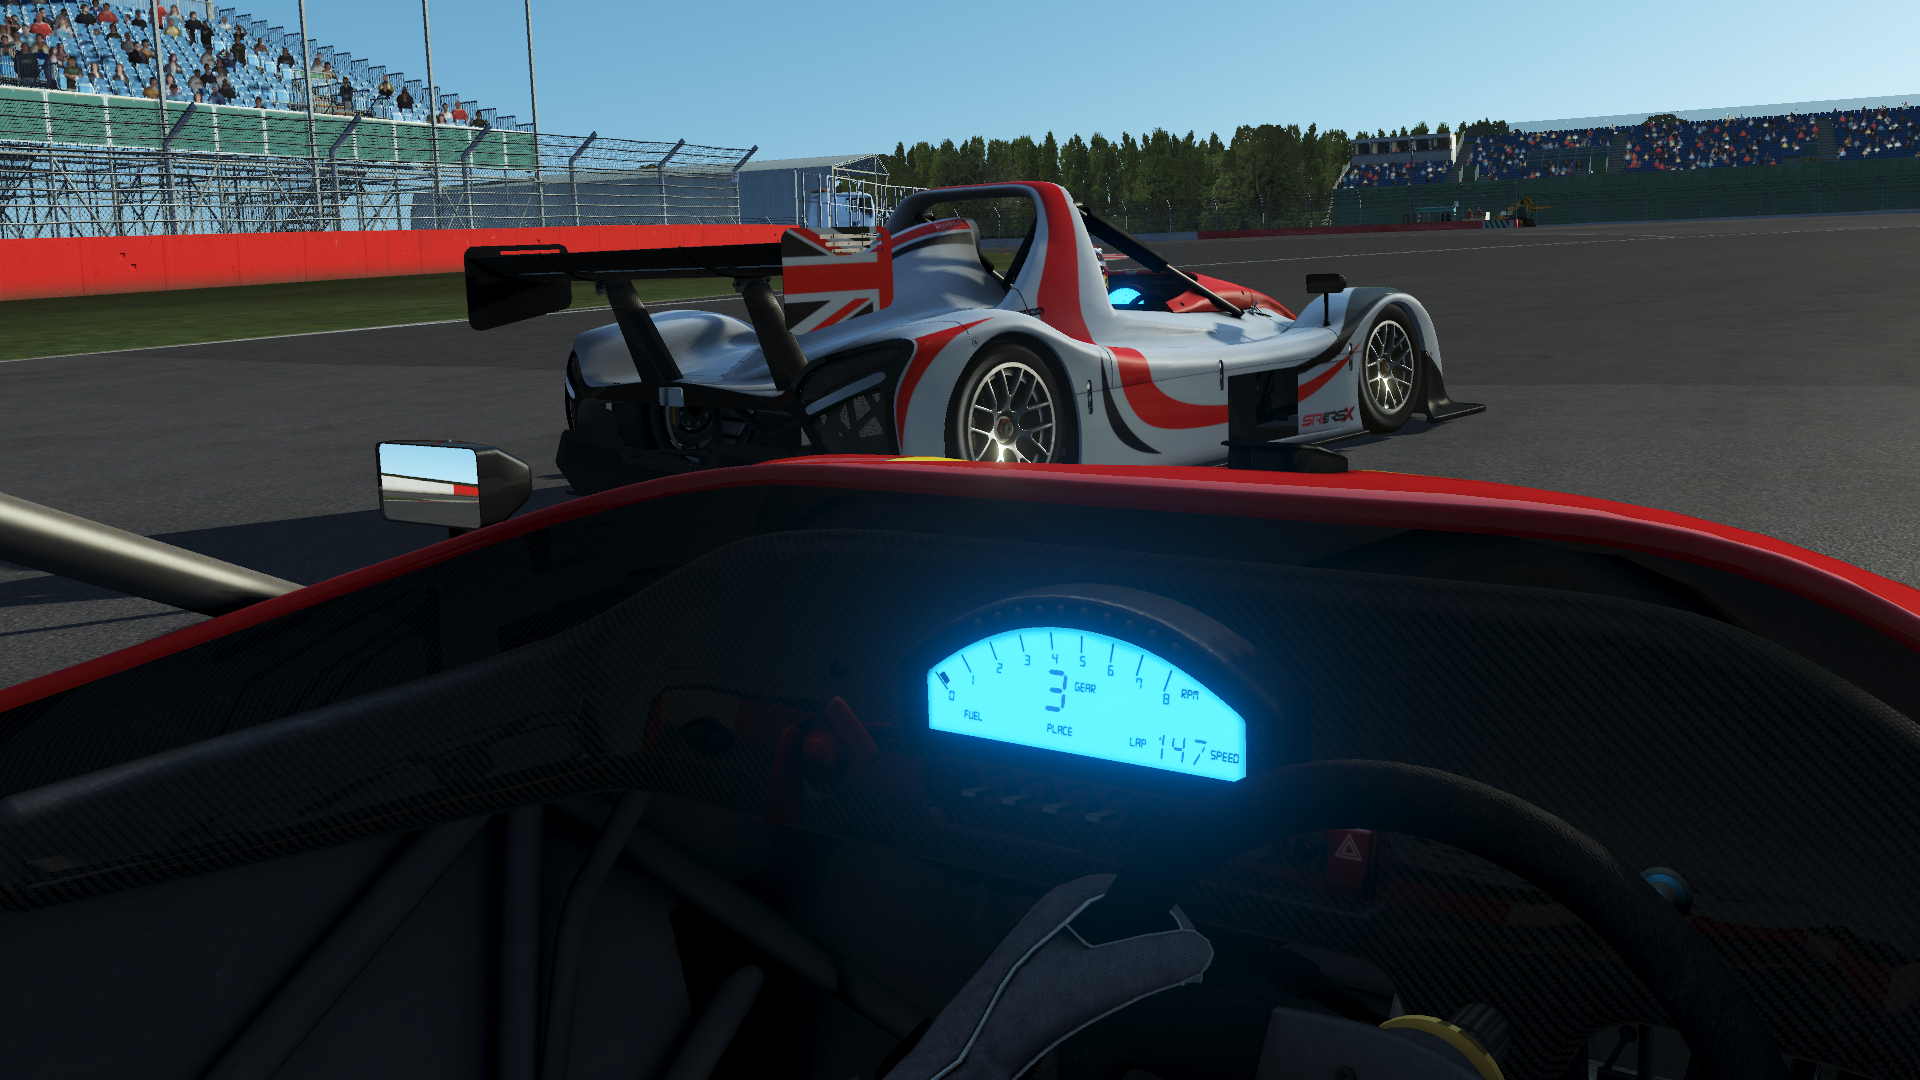 radical-silverstone-cockpit-1920x1080.png